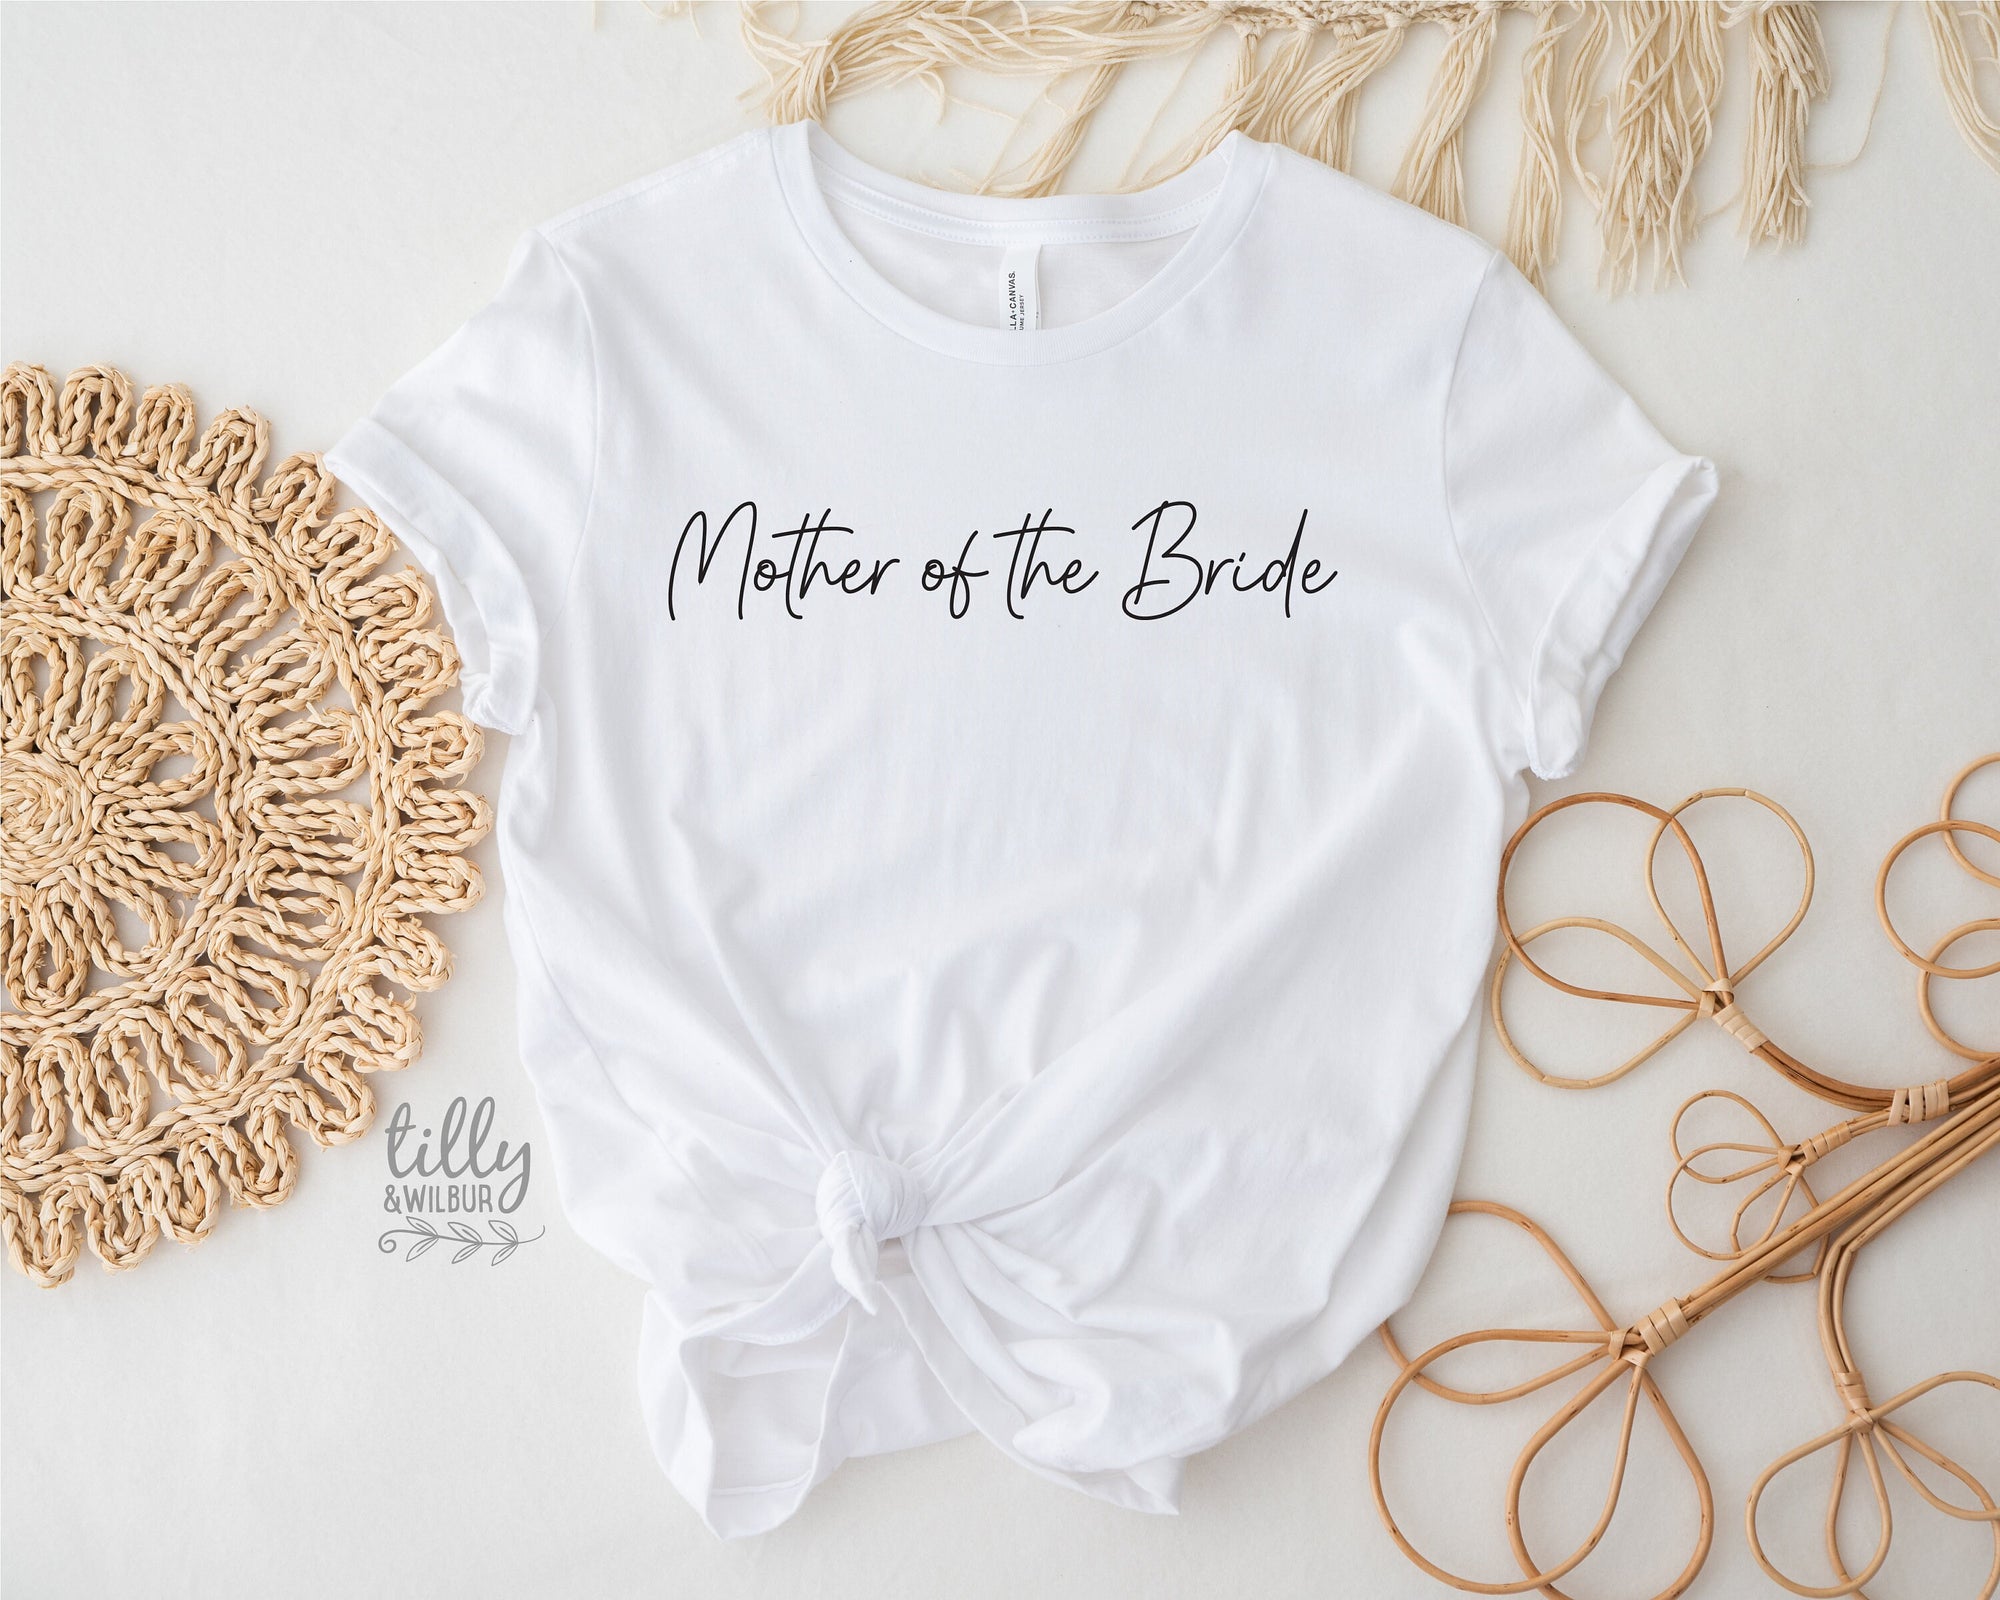 Mother Of The Bride T-Shirt, Bride Tribe T-Shirt, Bridesmaids T-Shirt, Matching Bridal Party Gifts, Wedding Gift, Hens Party Shirts, Groom